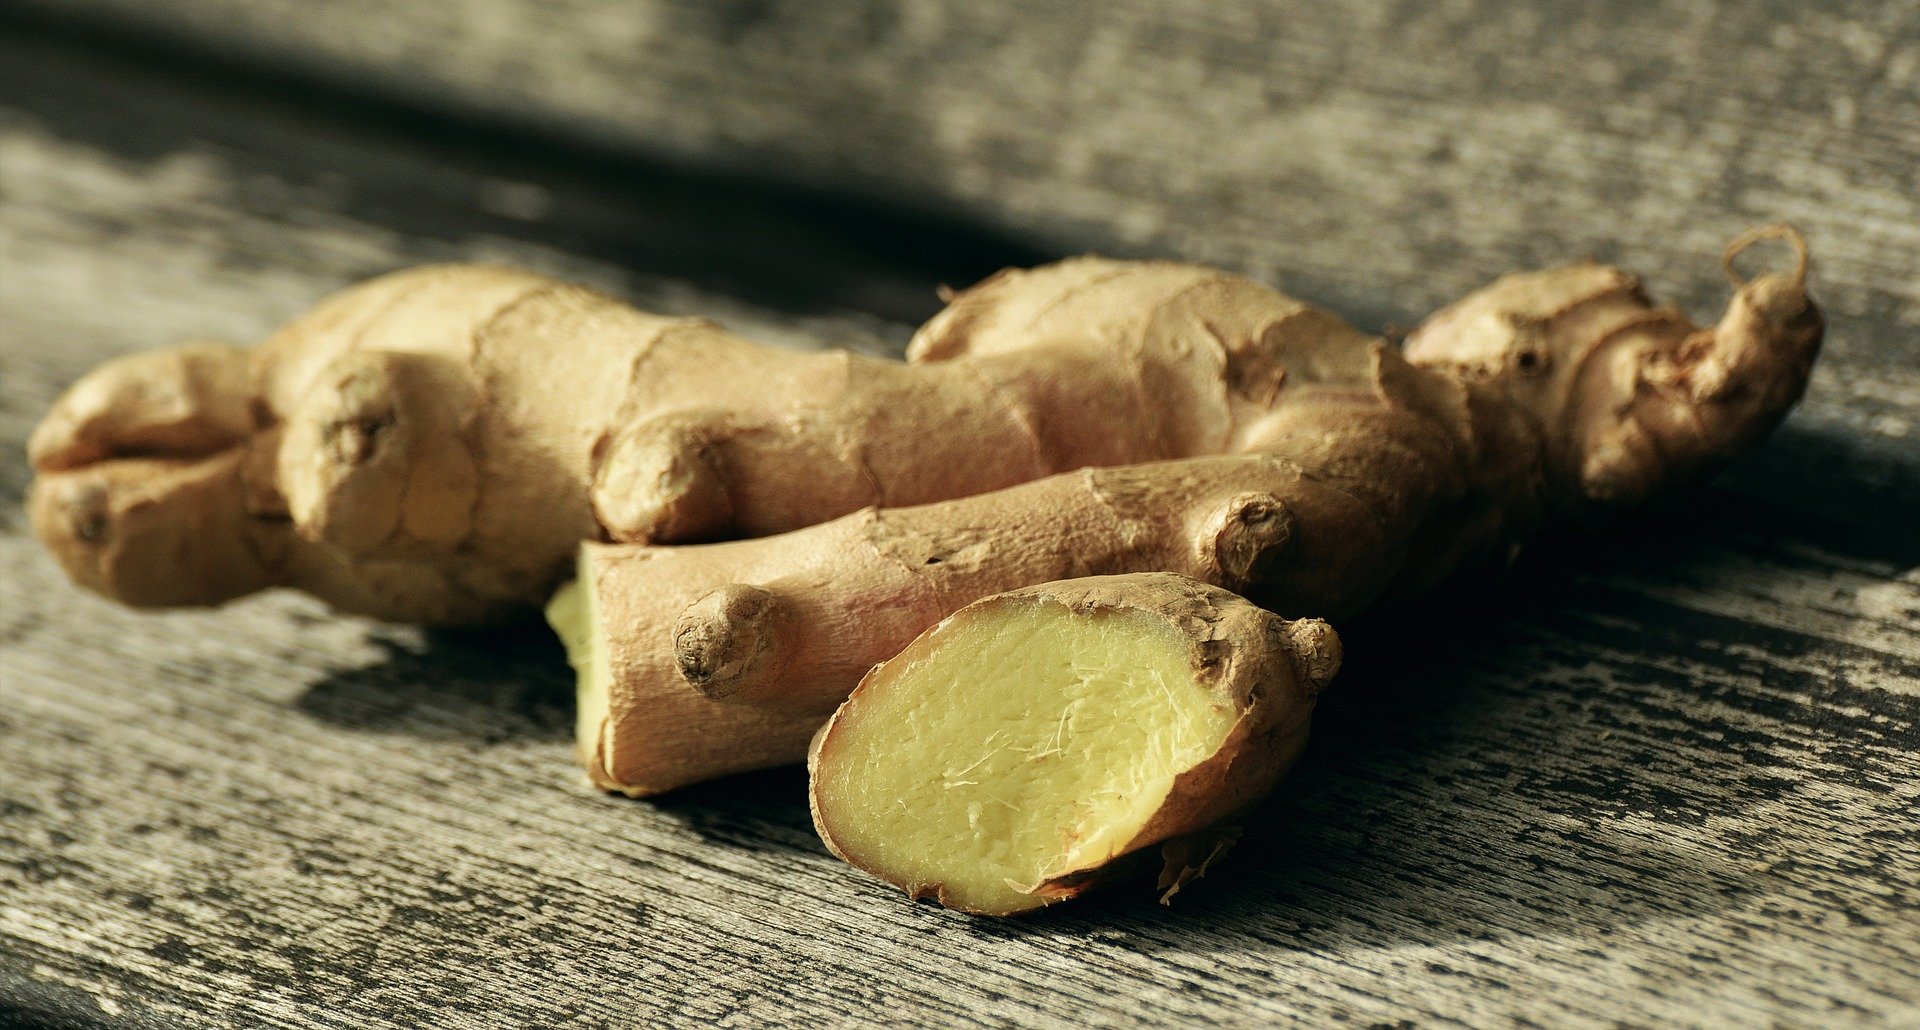 New research has found that ginger neutralizes certain autoimmune diseases in mice